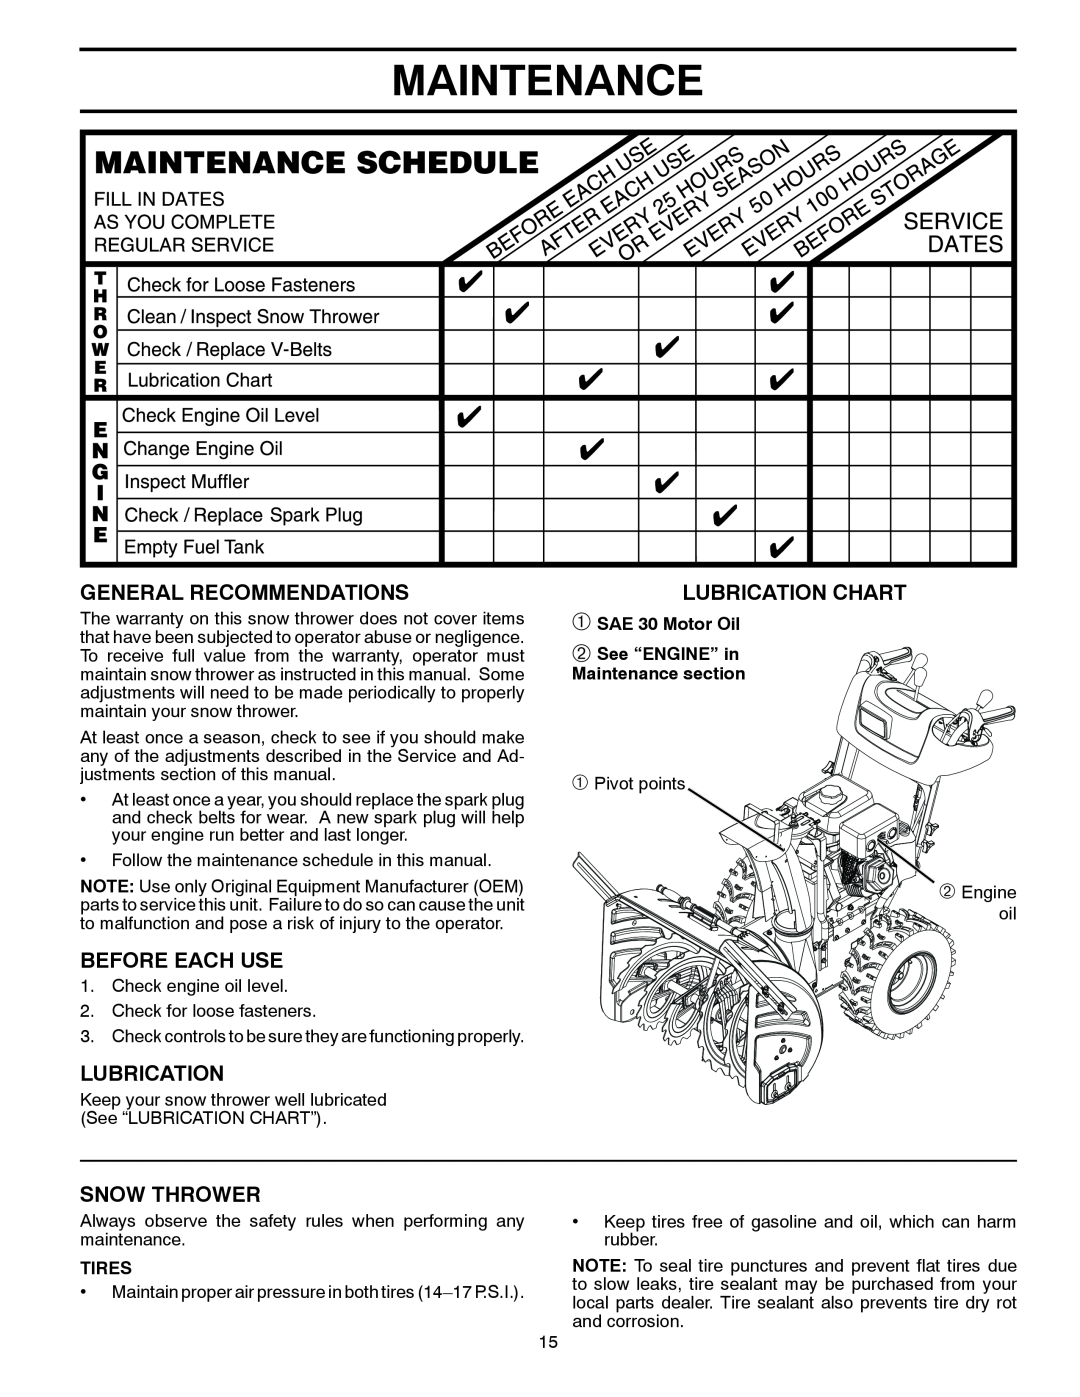 Husqvarna ST 327P warranty Maintenance, General Recommendations, Before Each Use, Lubrication, Snow Thrower, Tires 